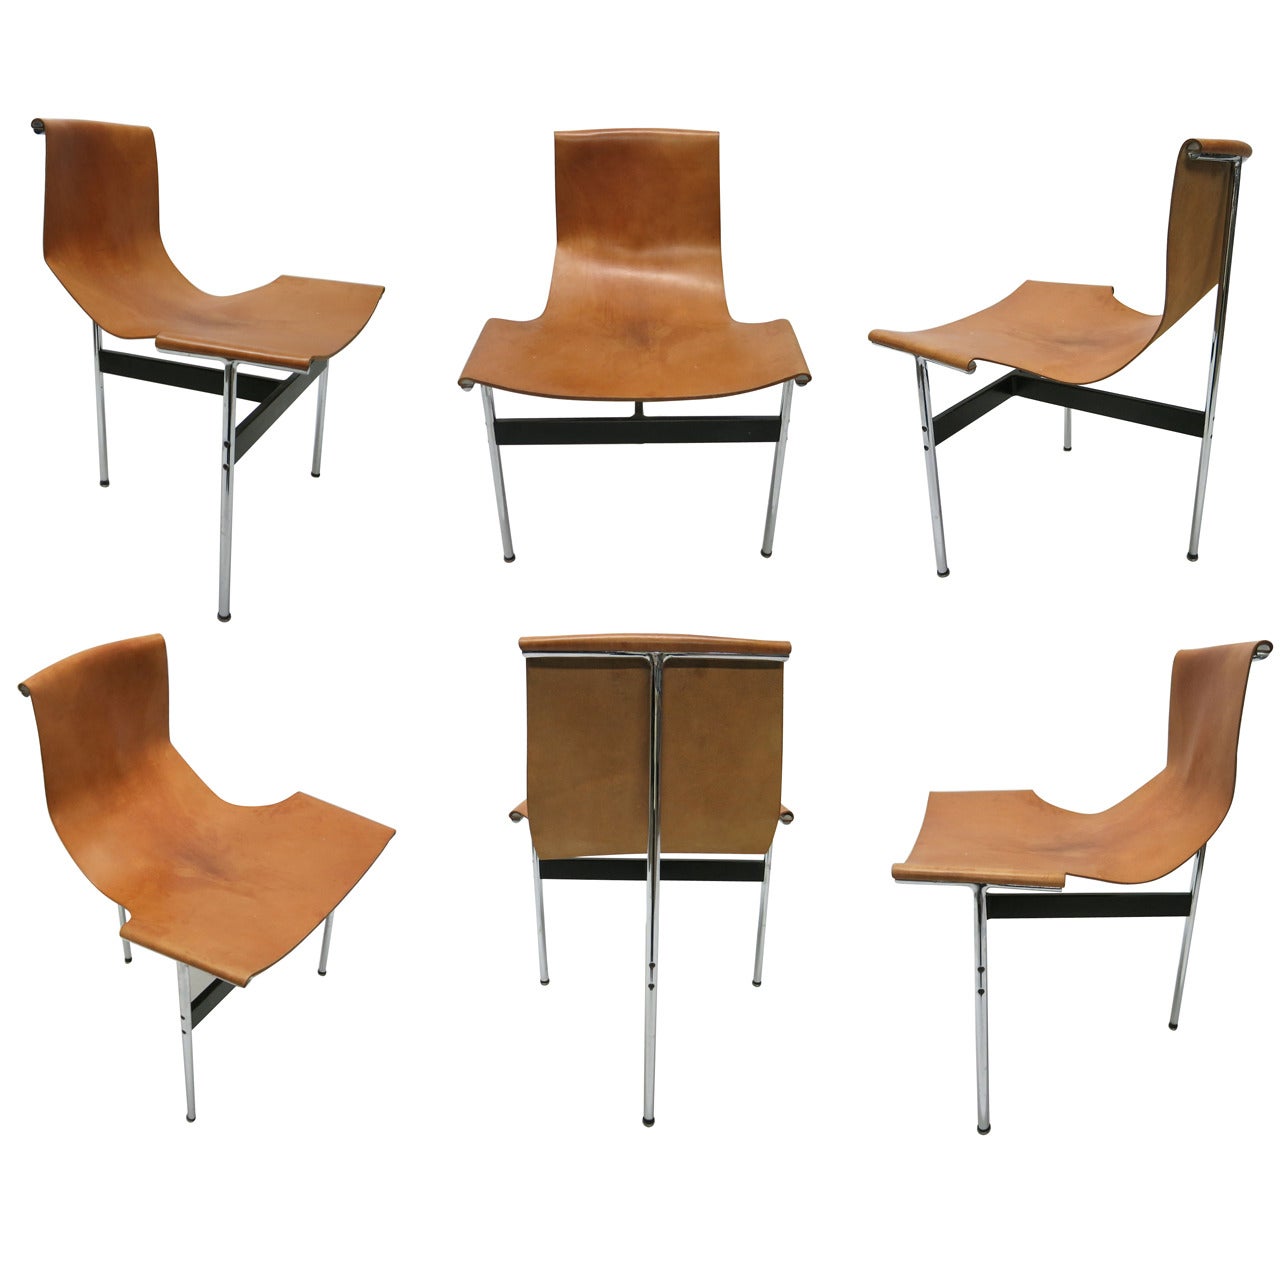 Six "T" Chairs from "Ross Littel Collection" by Laverne, 1965